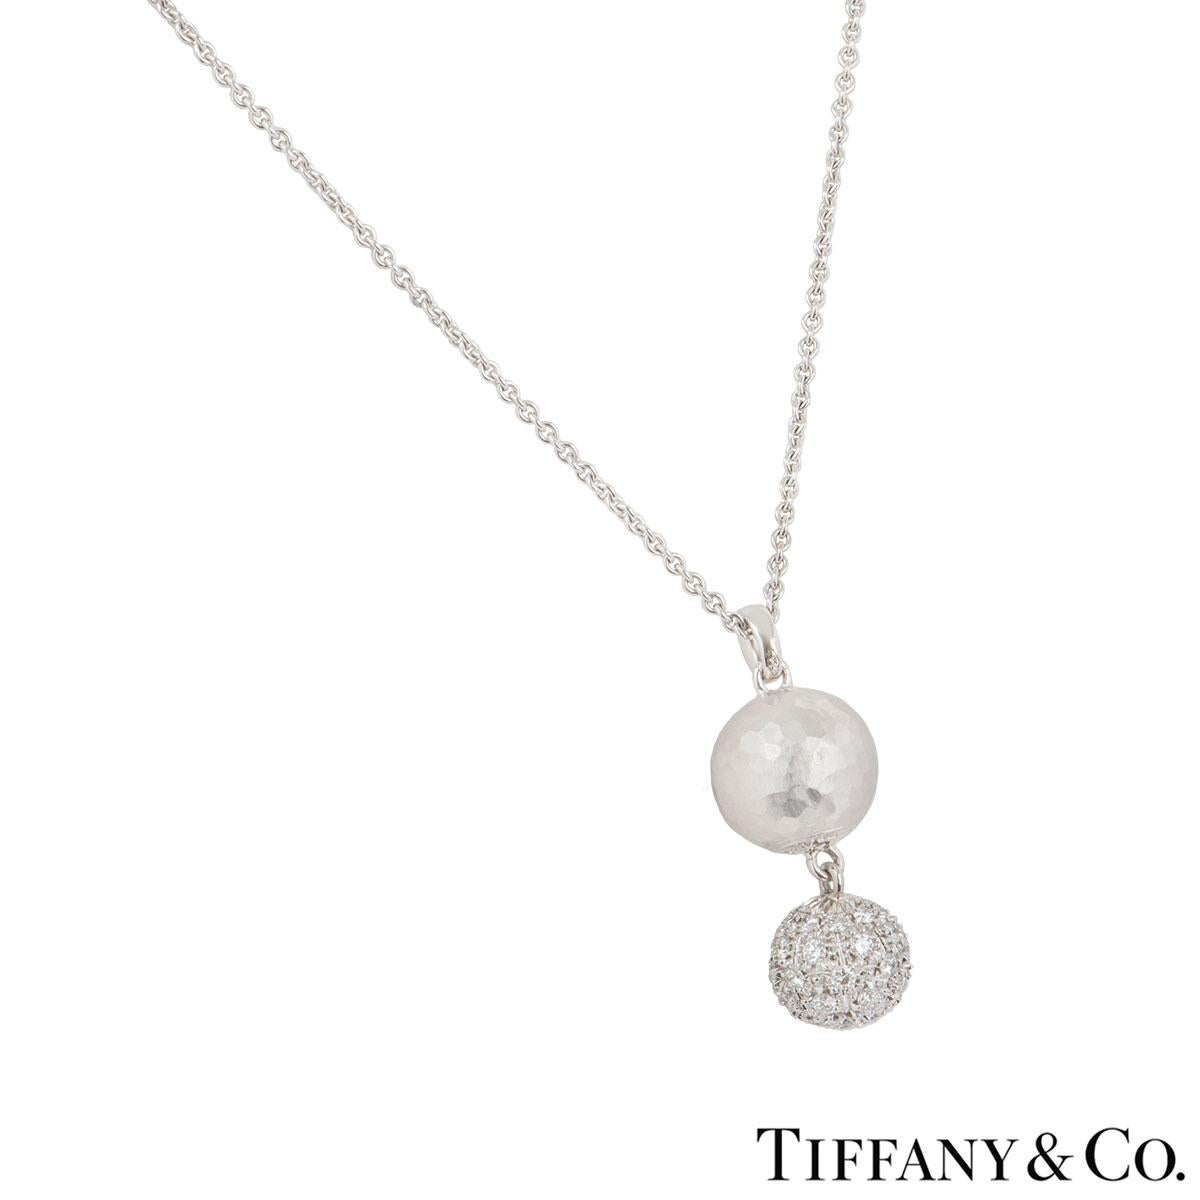 An elegant 18k white gold diamond 2 ball motif by Tiffany & Co. from the Paloma Picasso collection. The necklace features 2 ball motifs, one set with a hammer finish with a smaller ball suspended from it set with pave round brilliant cut diamonds